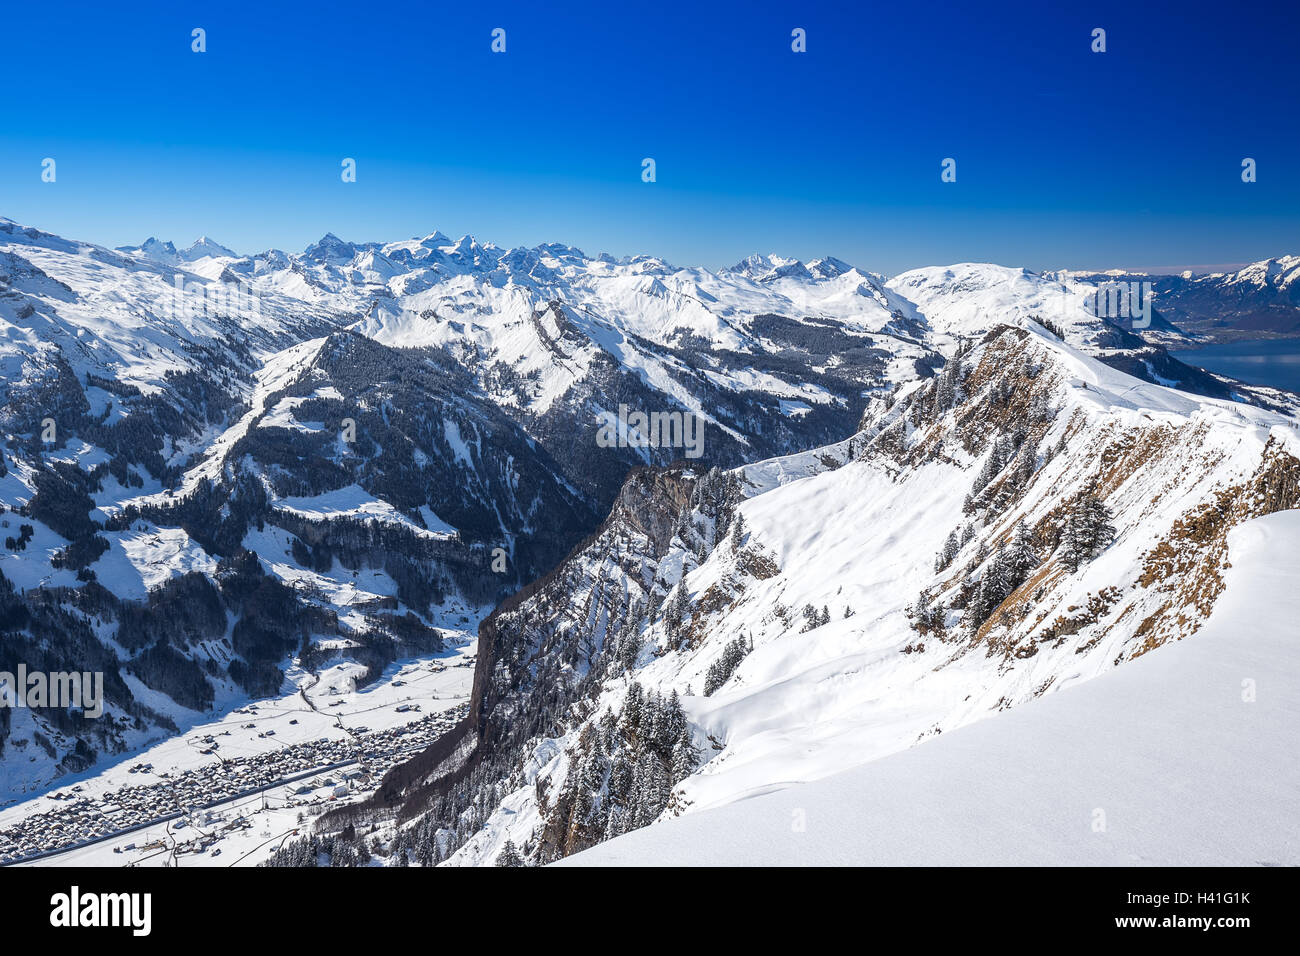 Muotathal valley and Lake Lucerne surrounded by Swiss Alps seen from Hoch Ybrig ski resort, Schwyz, Central Switzerland Stock Photo